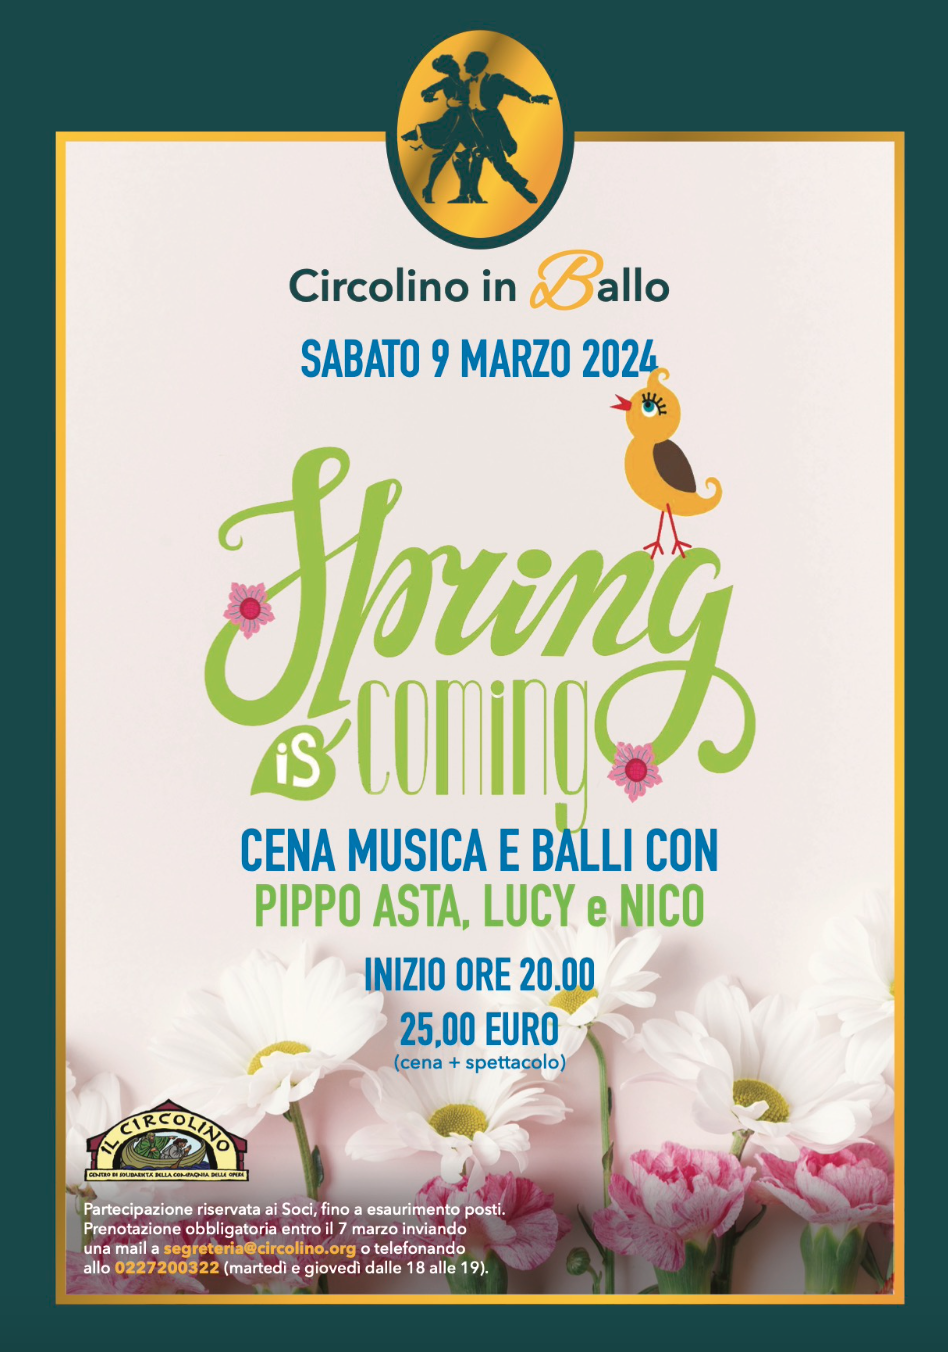 Featured image for “MIlano: Spring is coming. Cena, musica e balli”